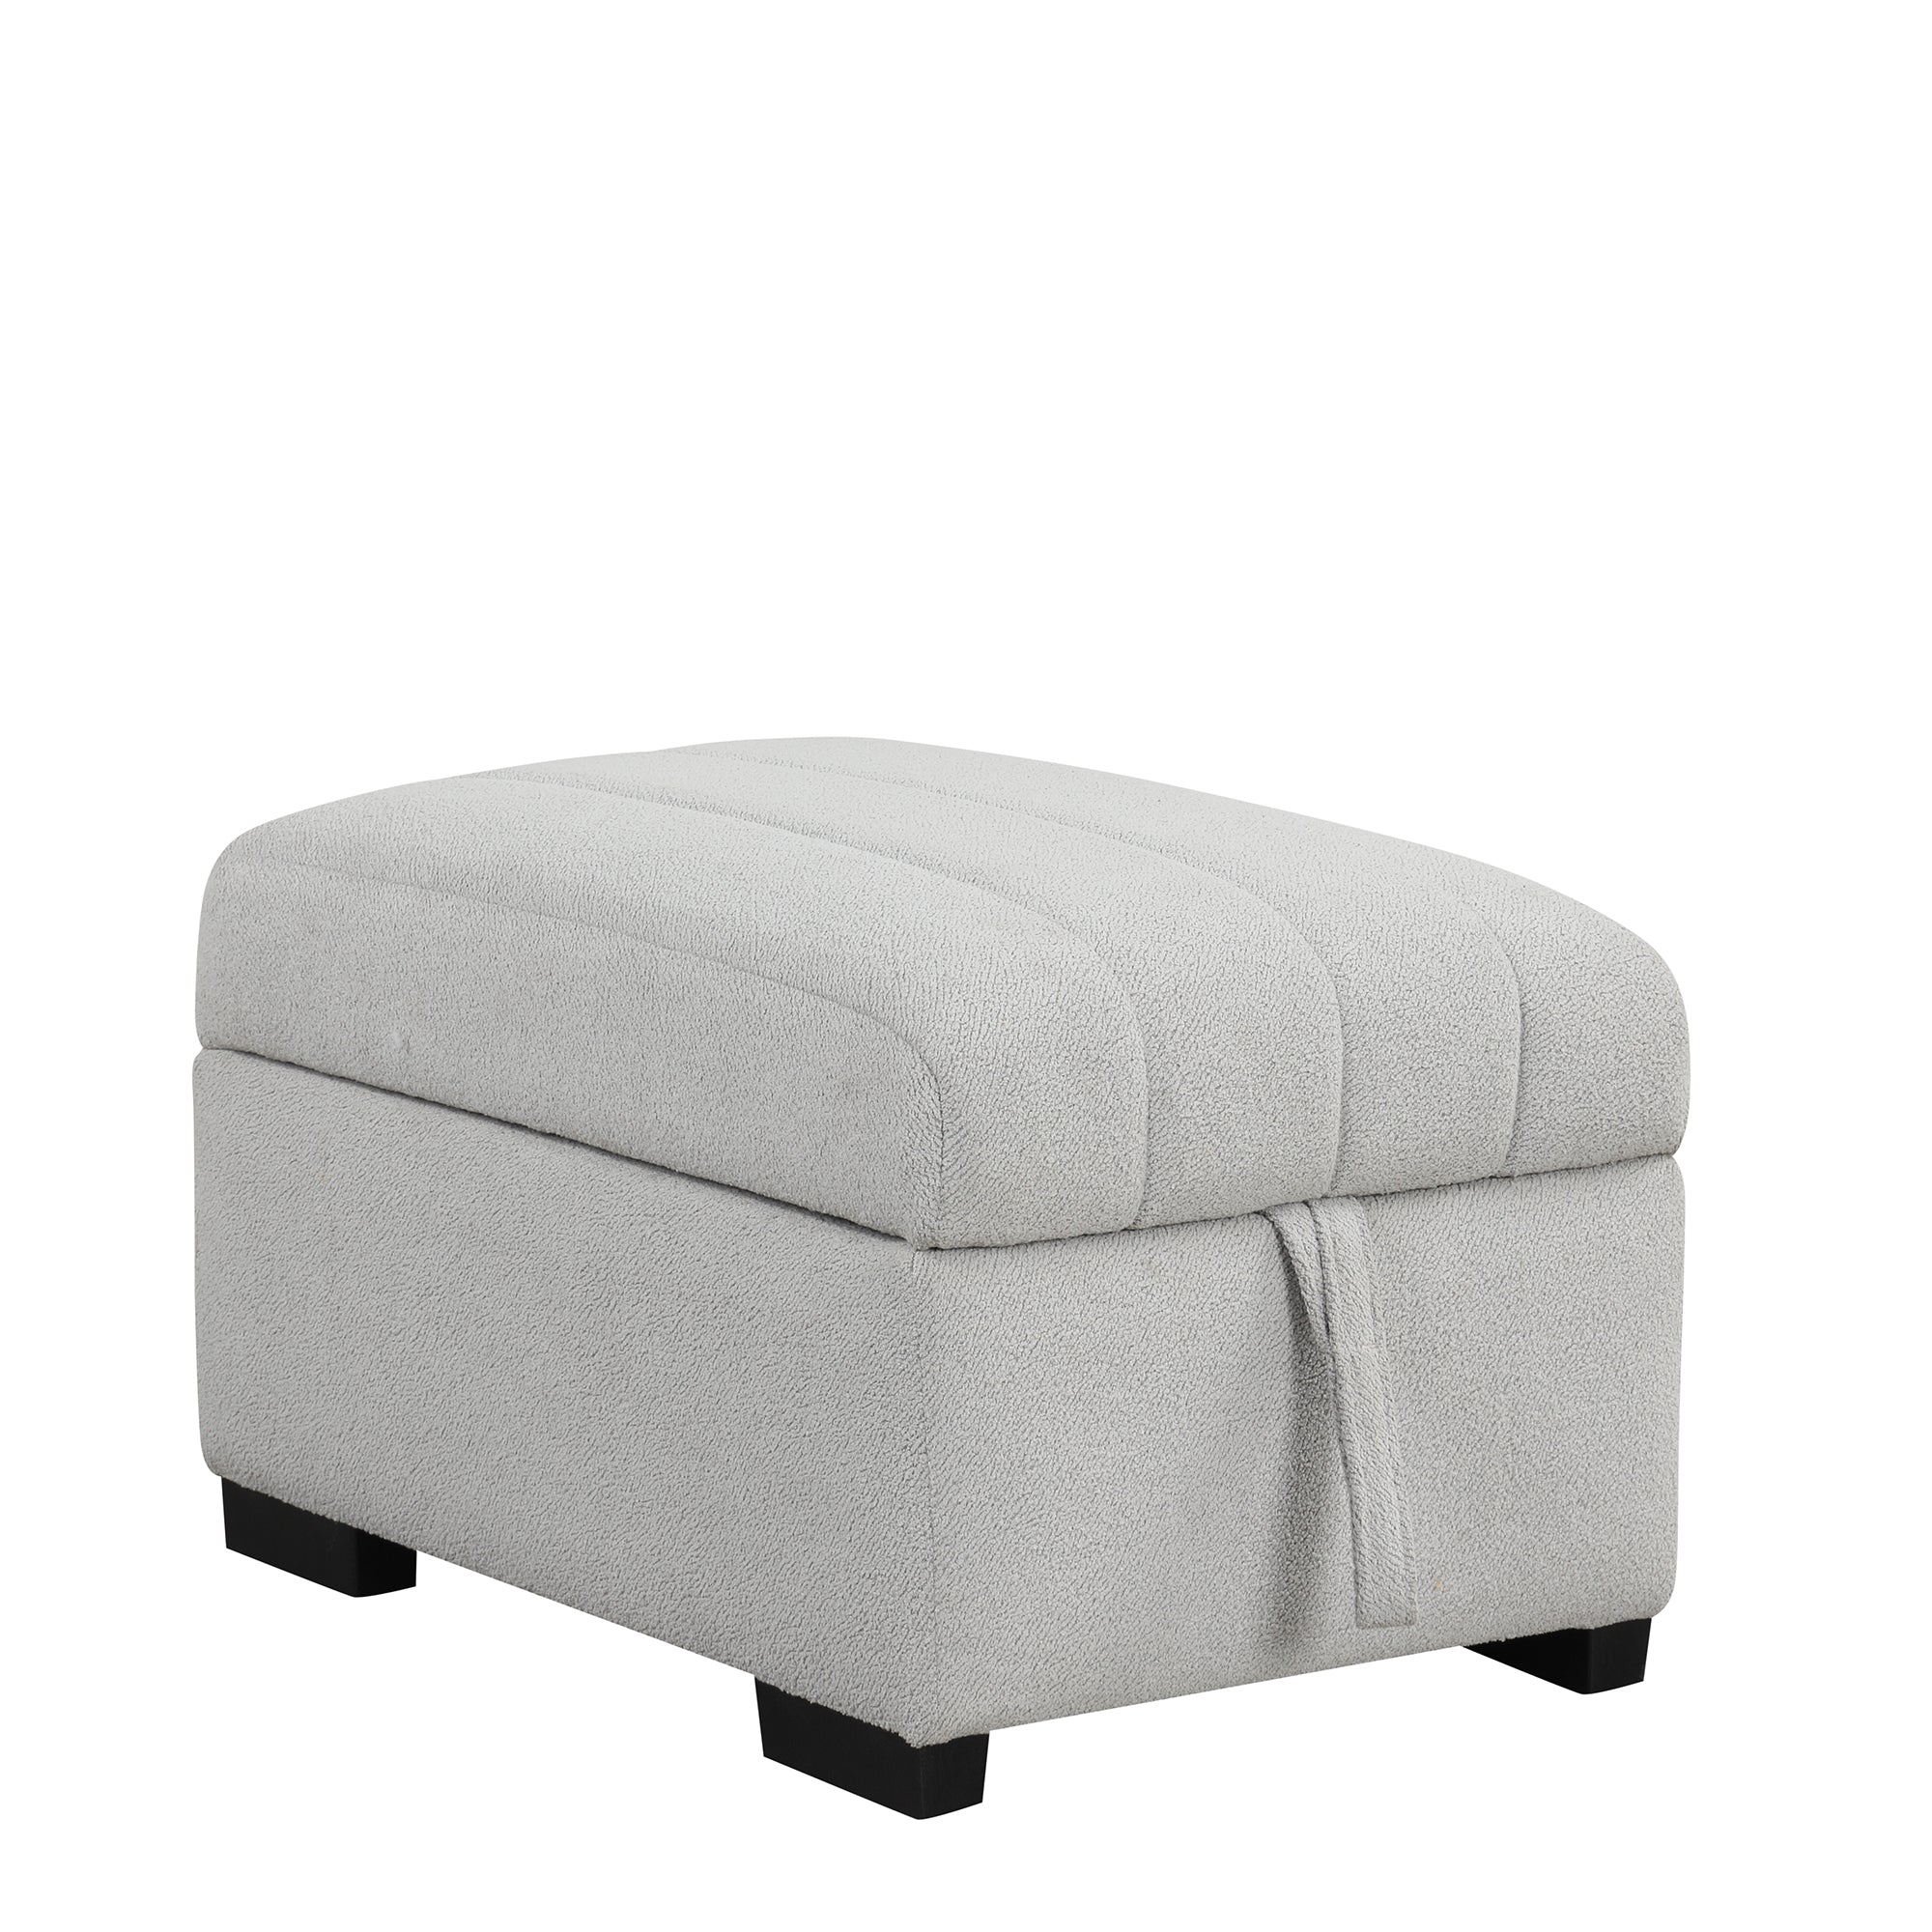 L-Shaped Sectional Pull Out Sofa Bed / Sleeper Sofa with Two USB Ports, Two Power Sockets and a Movable Storage Ottoman